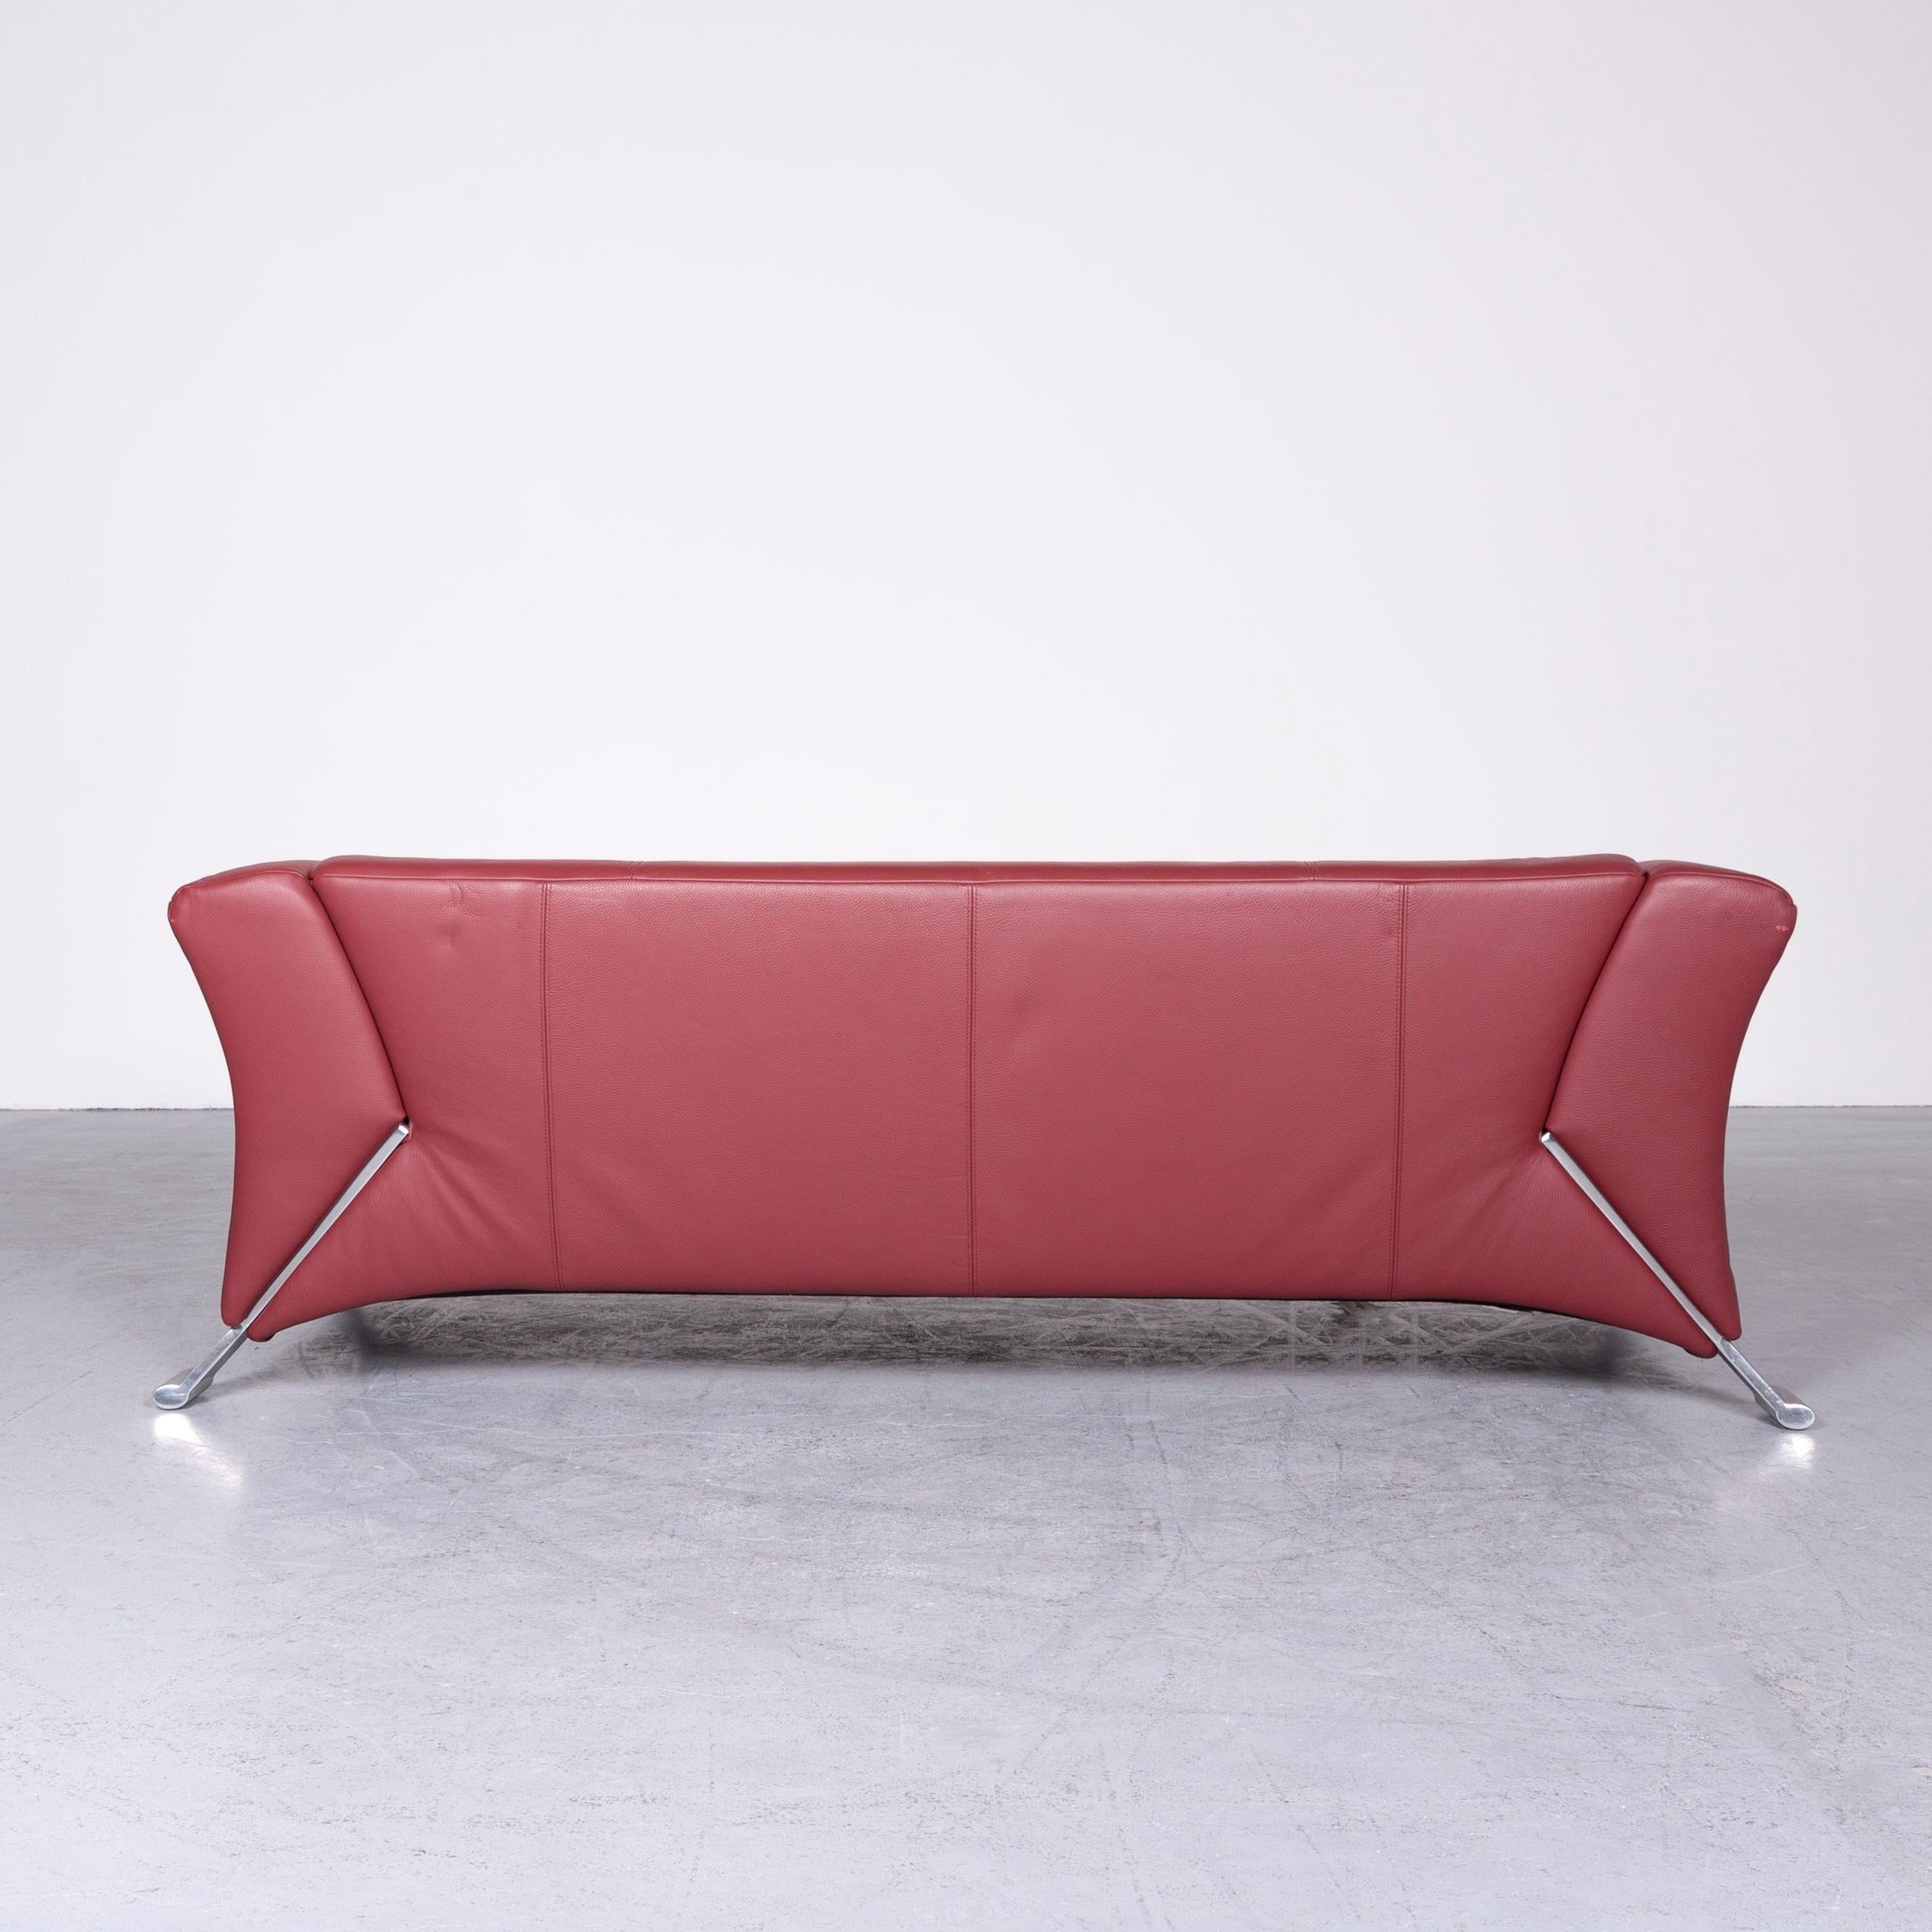 Rolf Benz 322 Designer Sofa Red Three-Seat Leather Couch 2